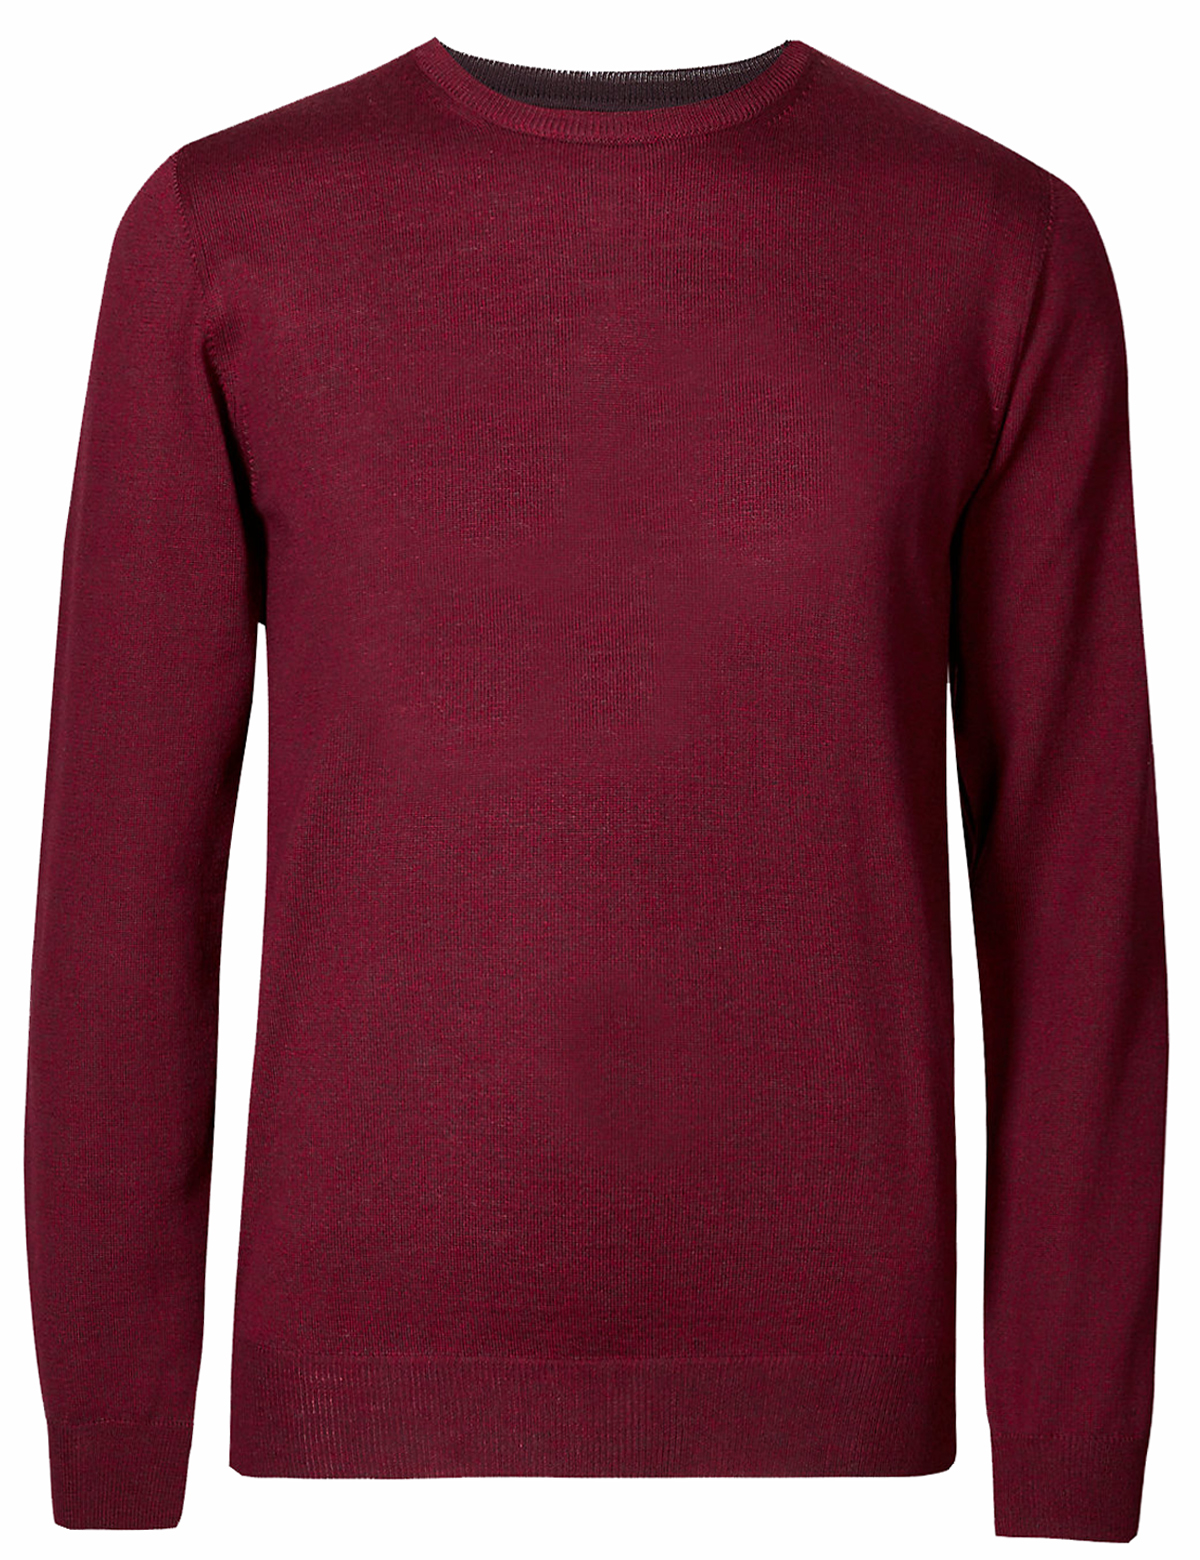 Marks and Spencer - - M&5 RED Pure Merino Wool Crew Neck Jumper - Size ...